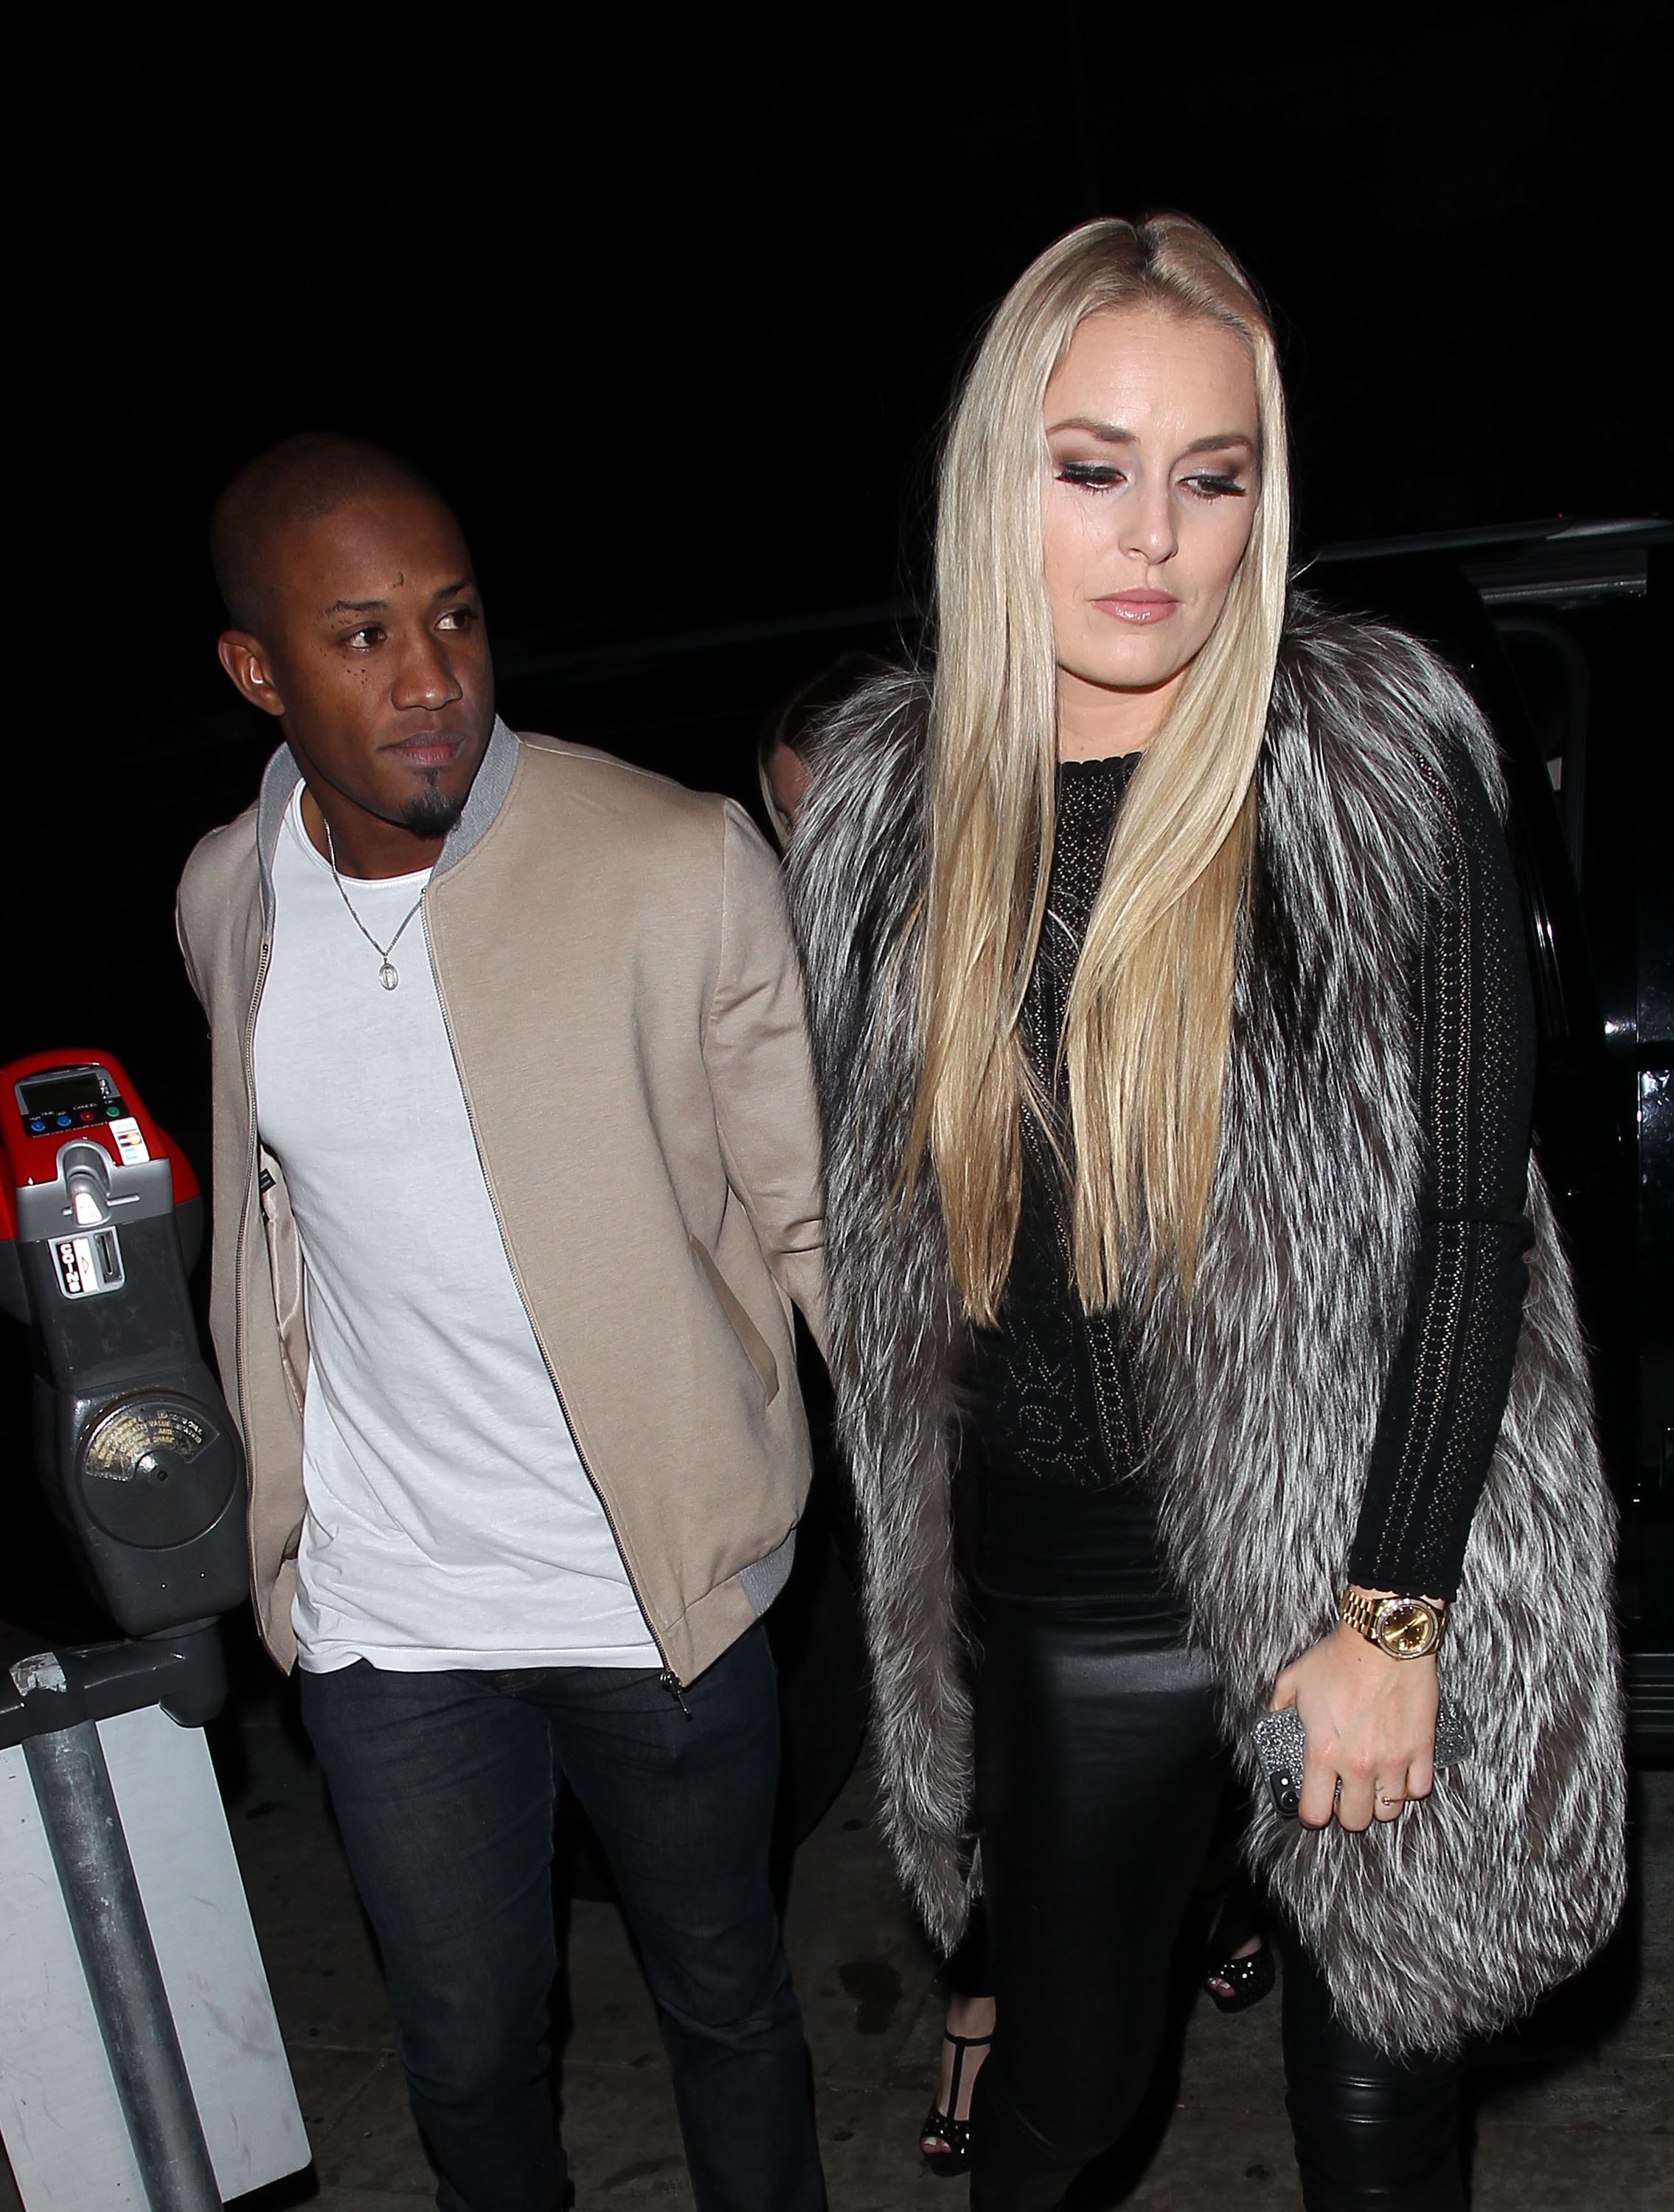 Lindsey Vonn heads to the Delilah club